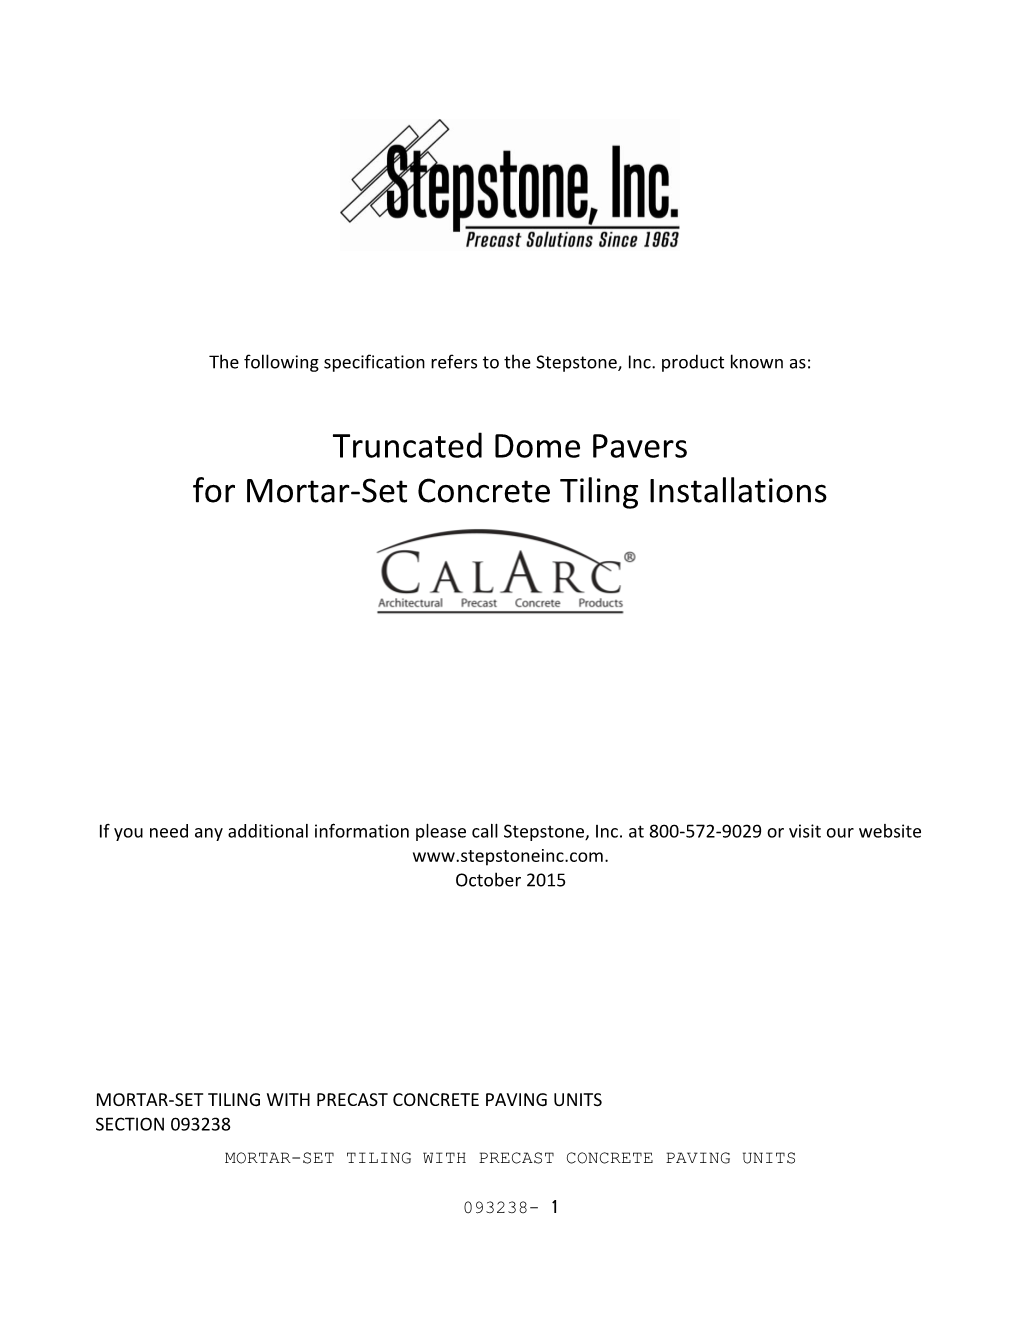 The Following Specification Refers to the Stepstone, Inc. Product Known As